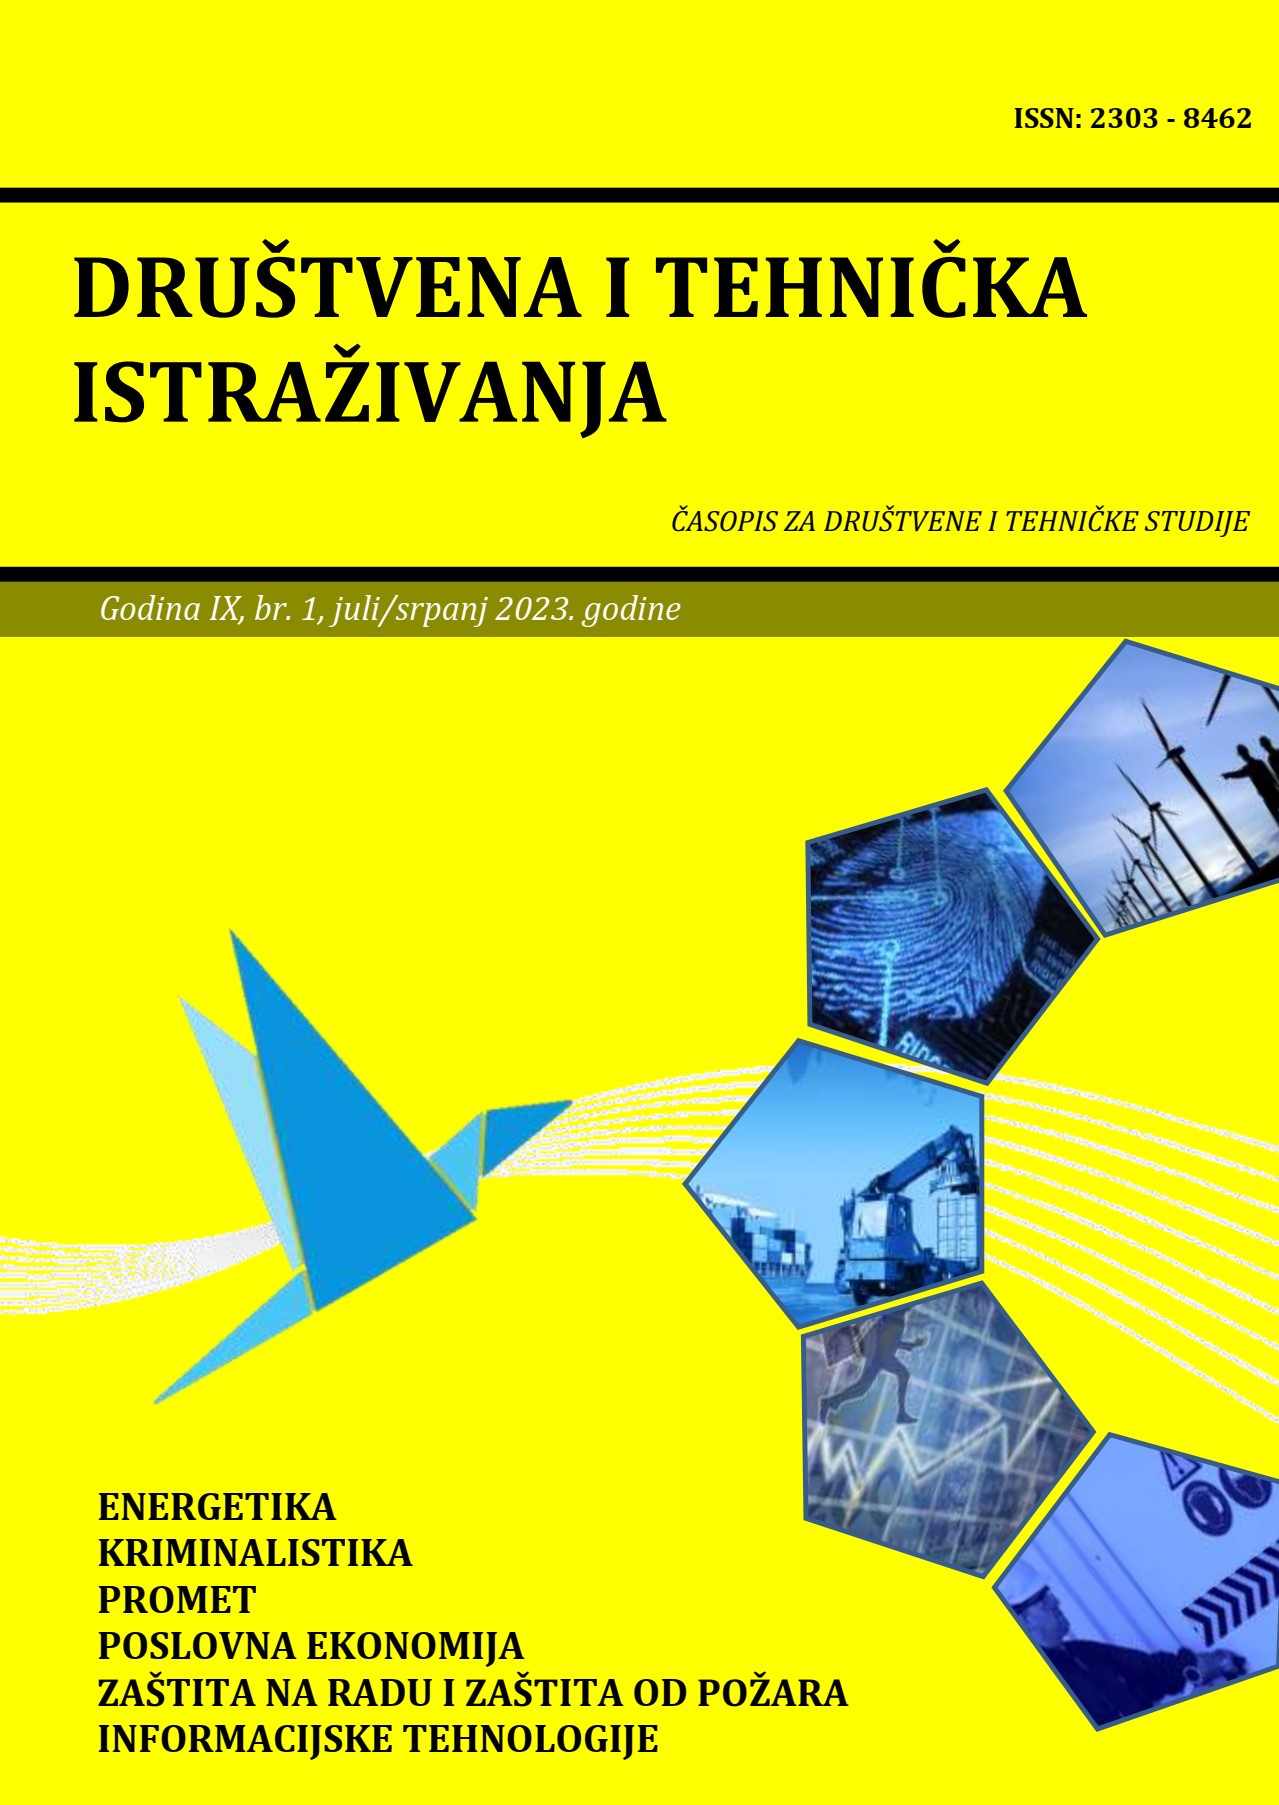 IMPACT OF THE COVID-19 PANDEMIC ON THE ECONOMY OF BOSNIA AND HERZEGOVINA Cover Image